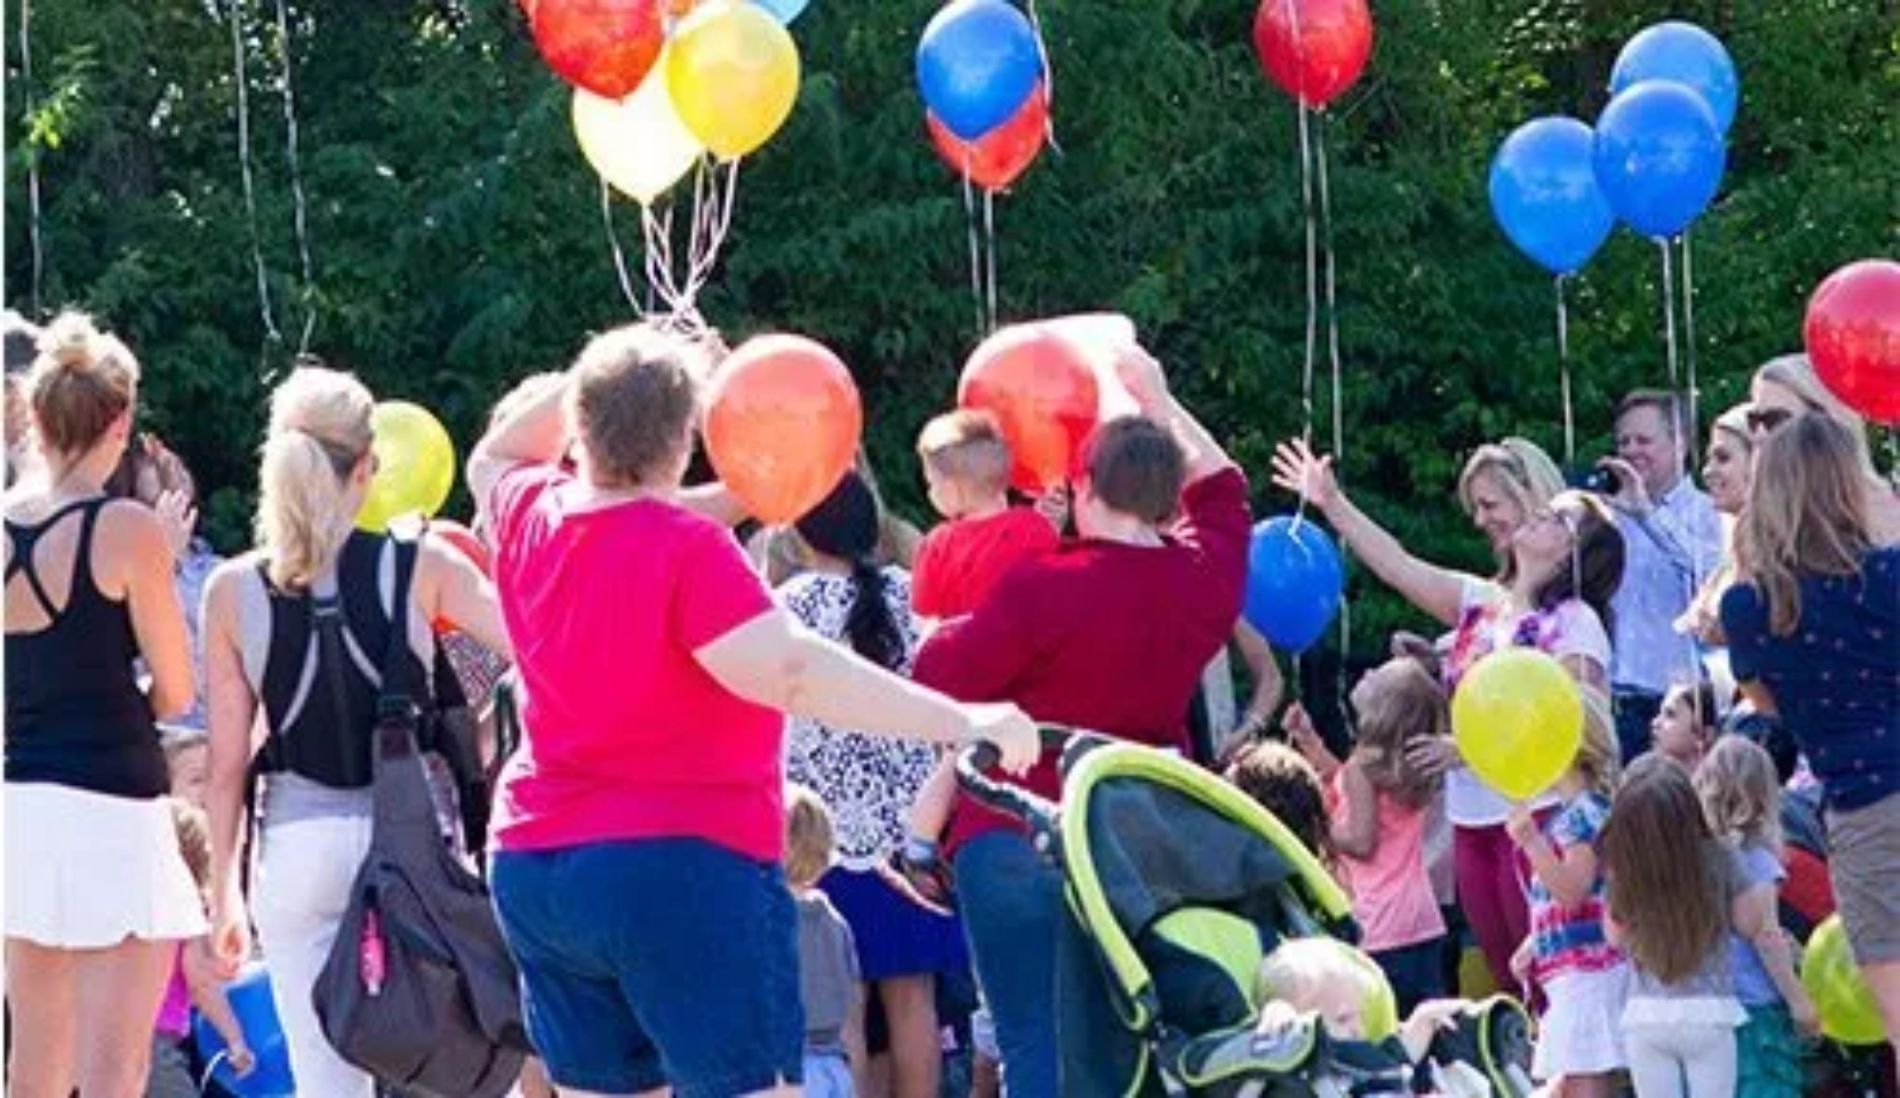 Group of people with balloons